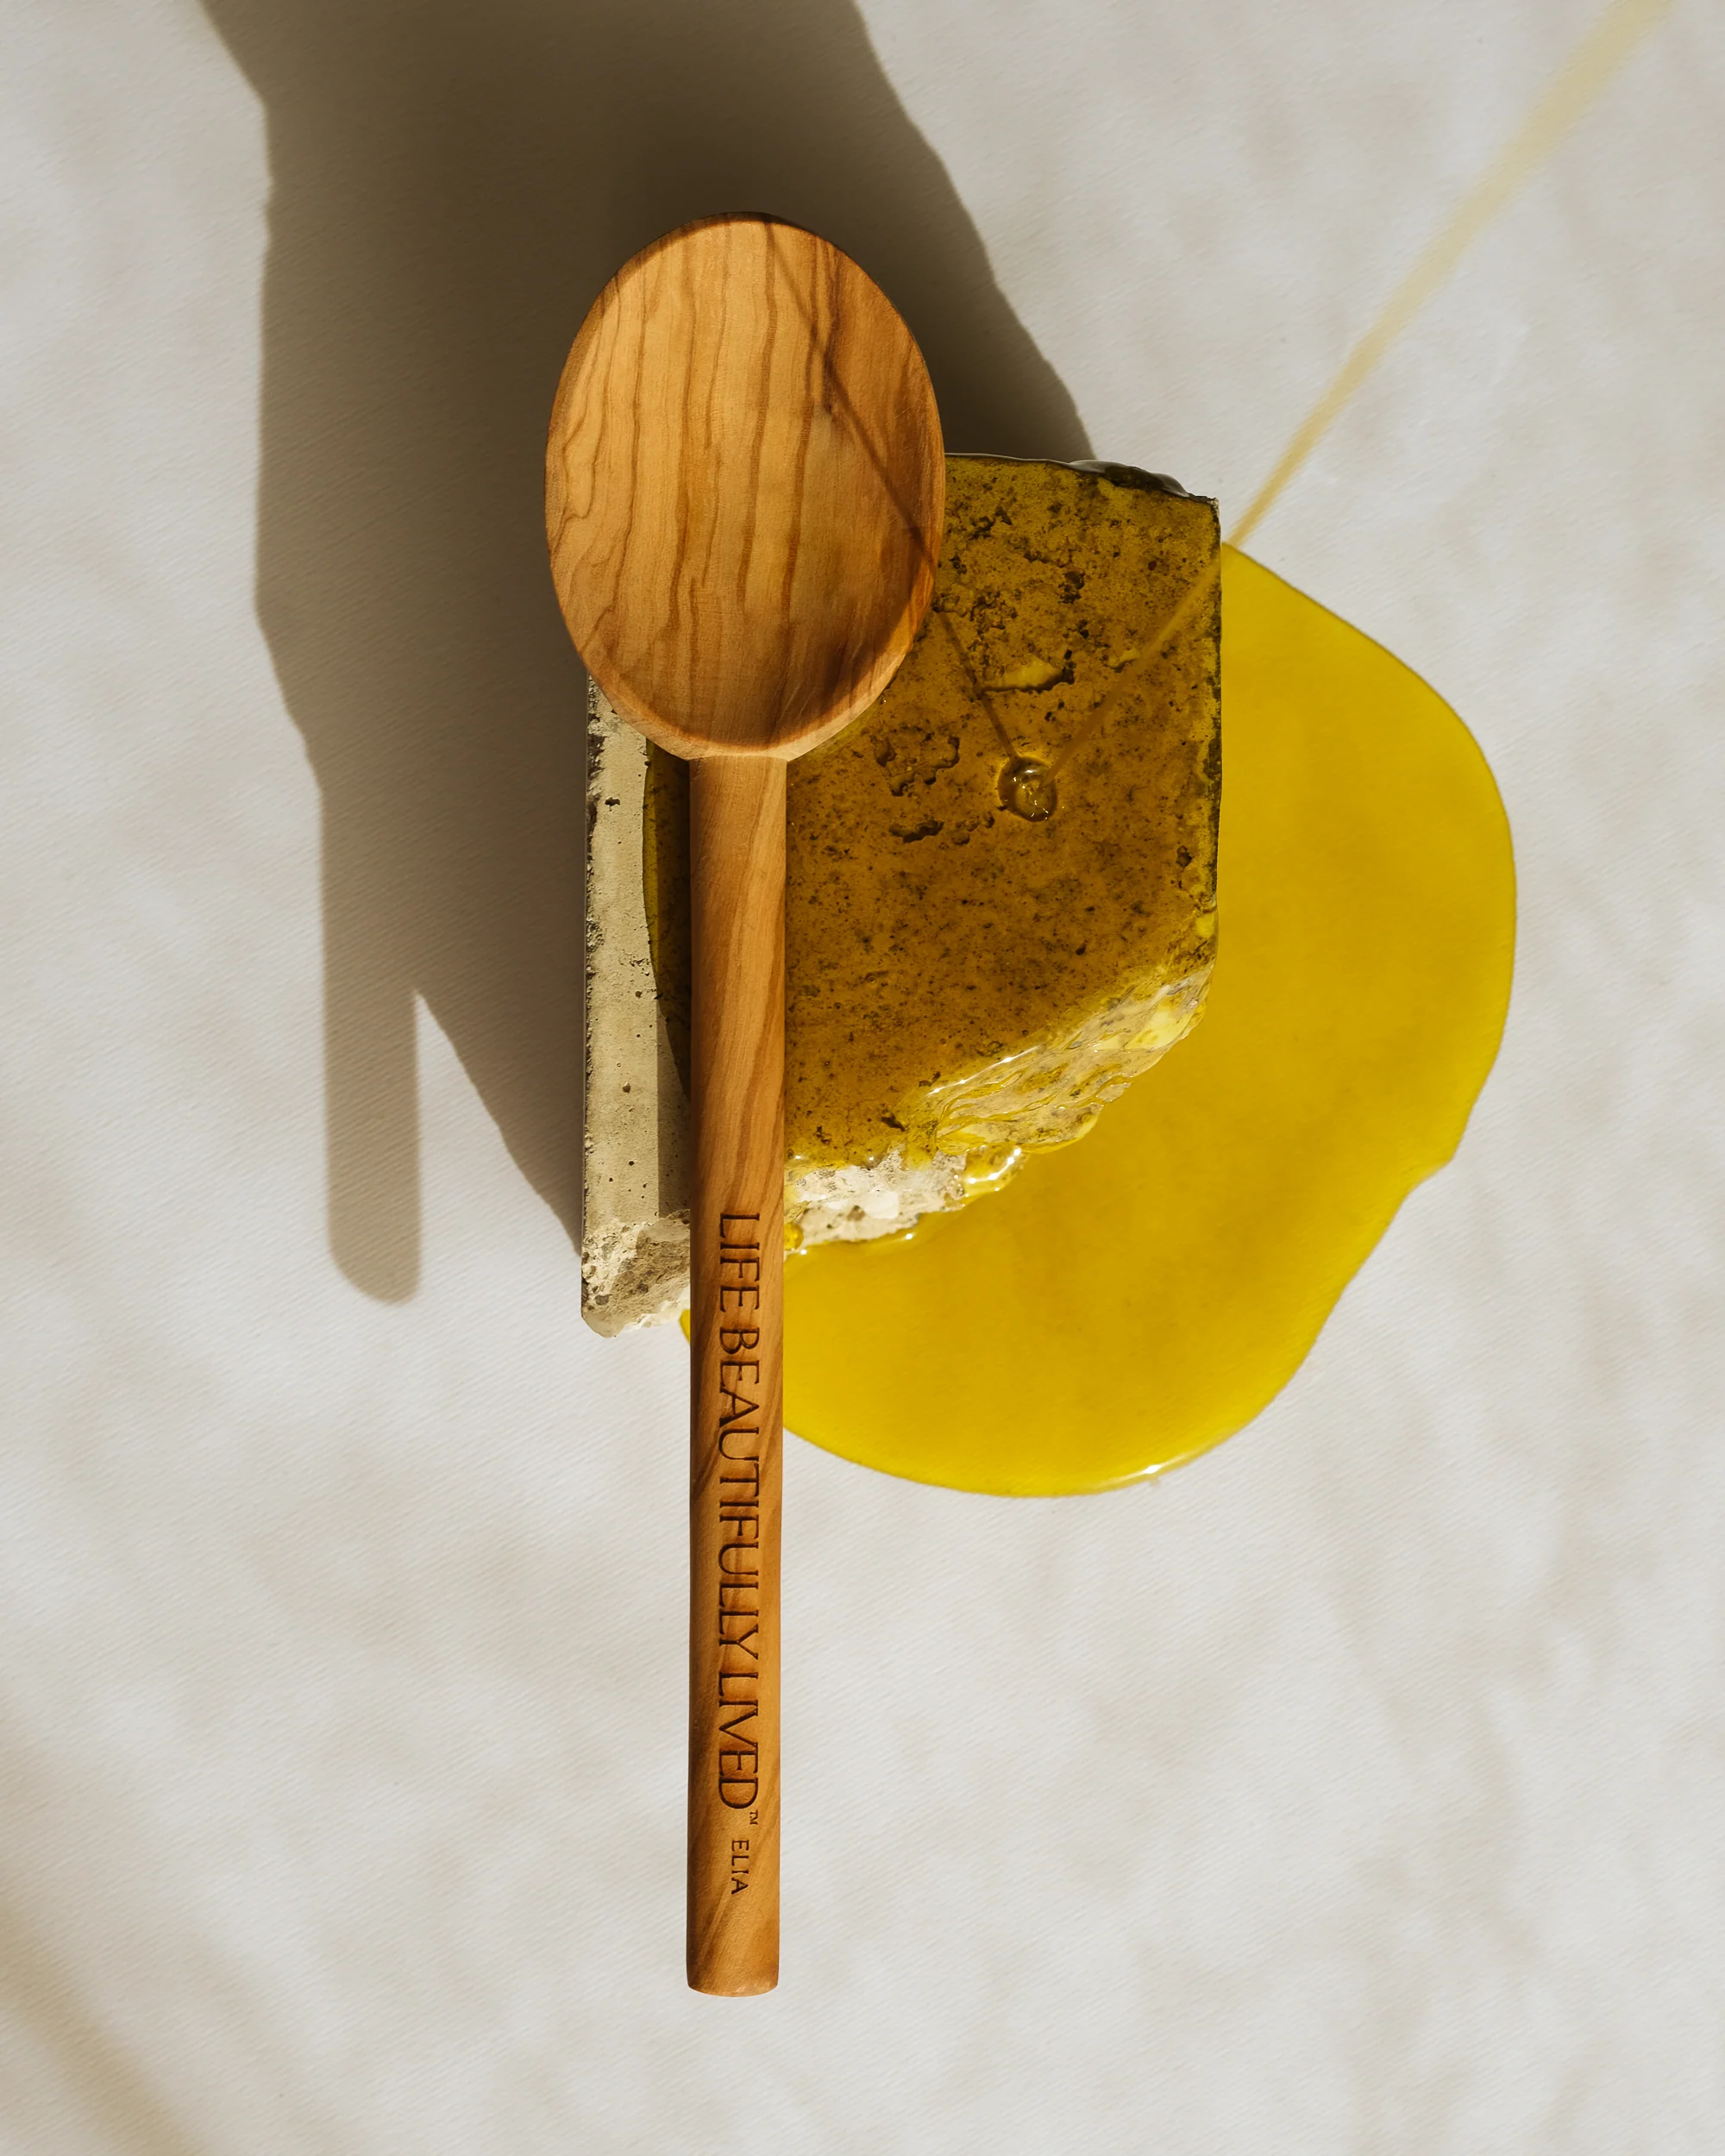 The Olive Wood Spoon